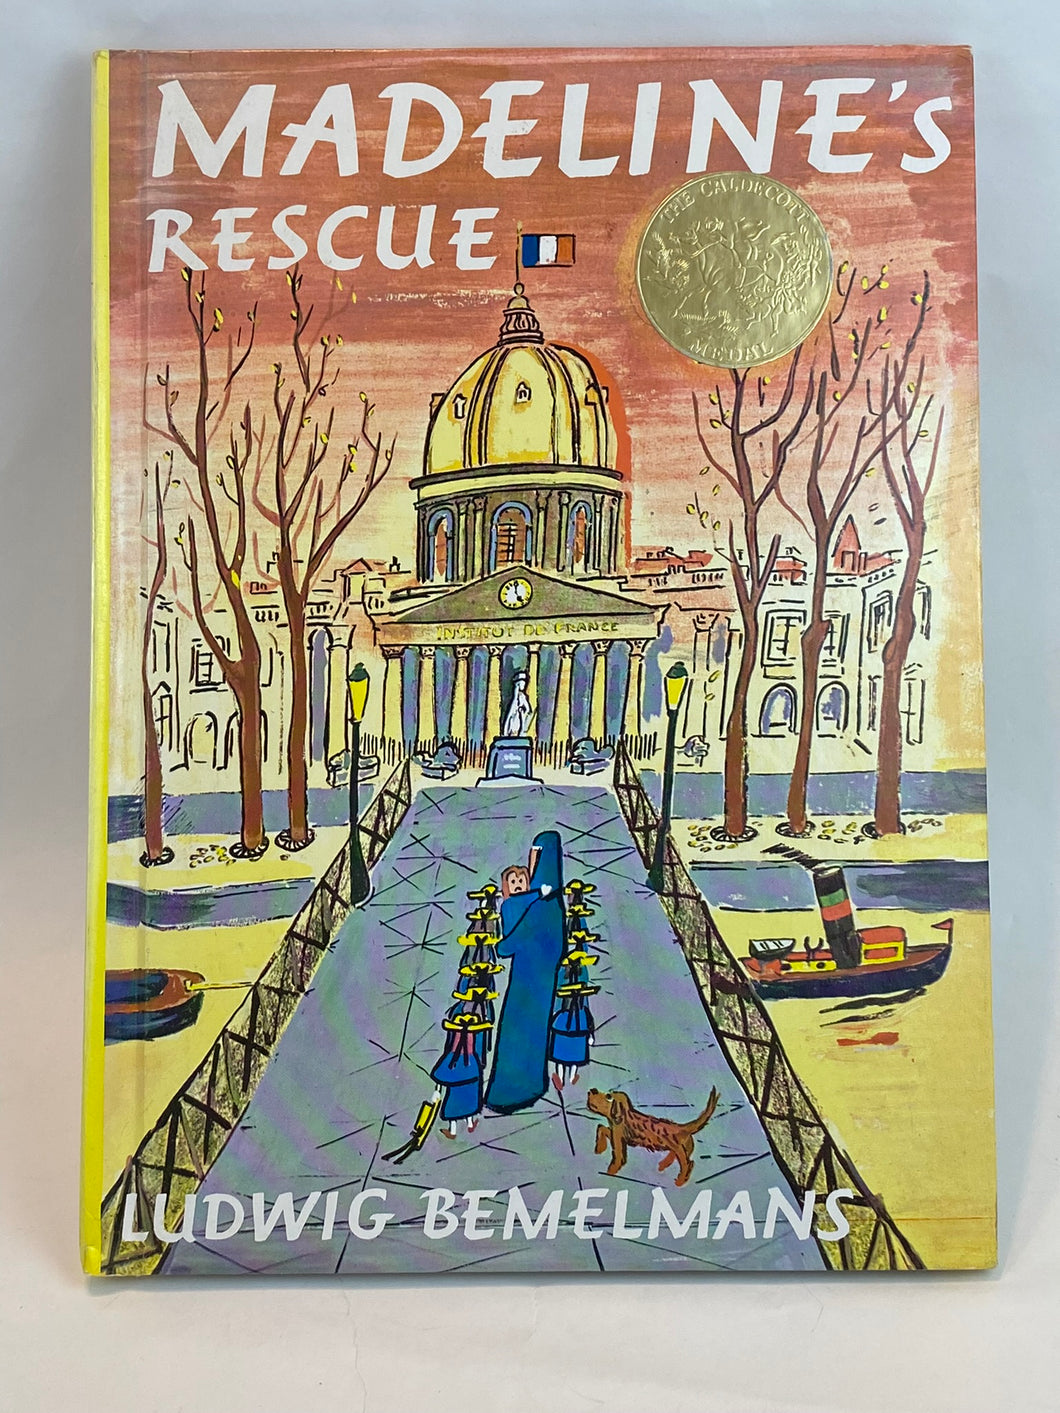 Madeline's Rescue 1981 Ludwig Bemelmans ISBN 0670447161